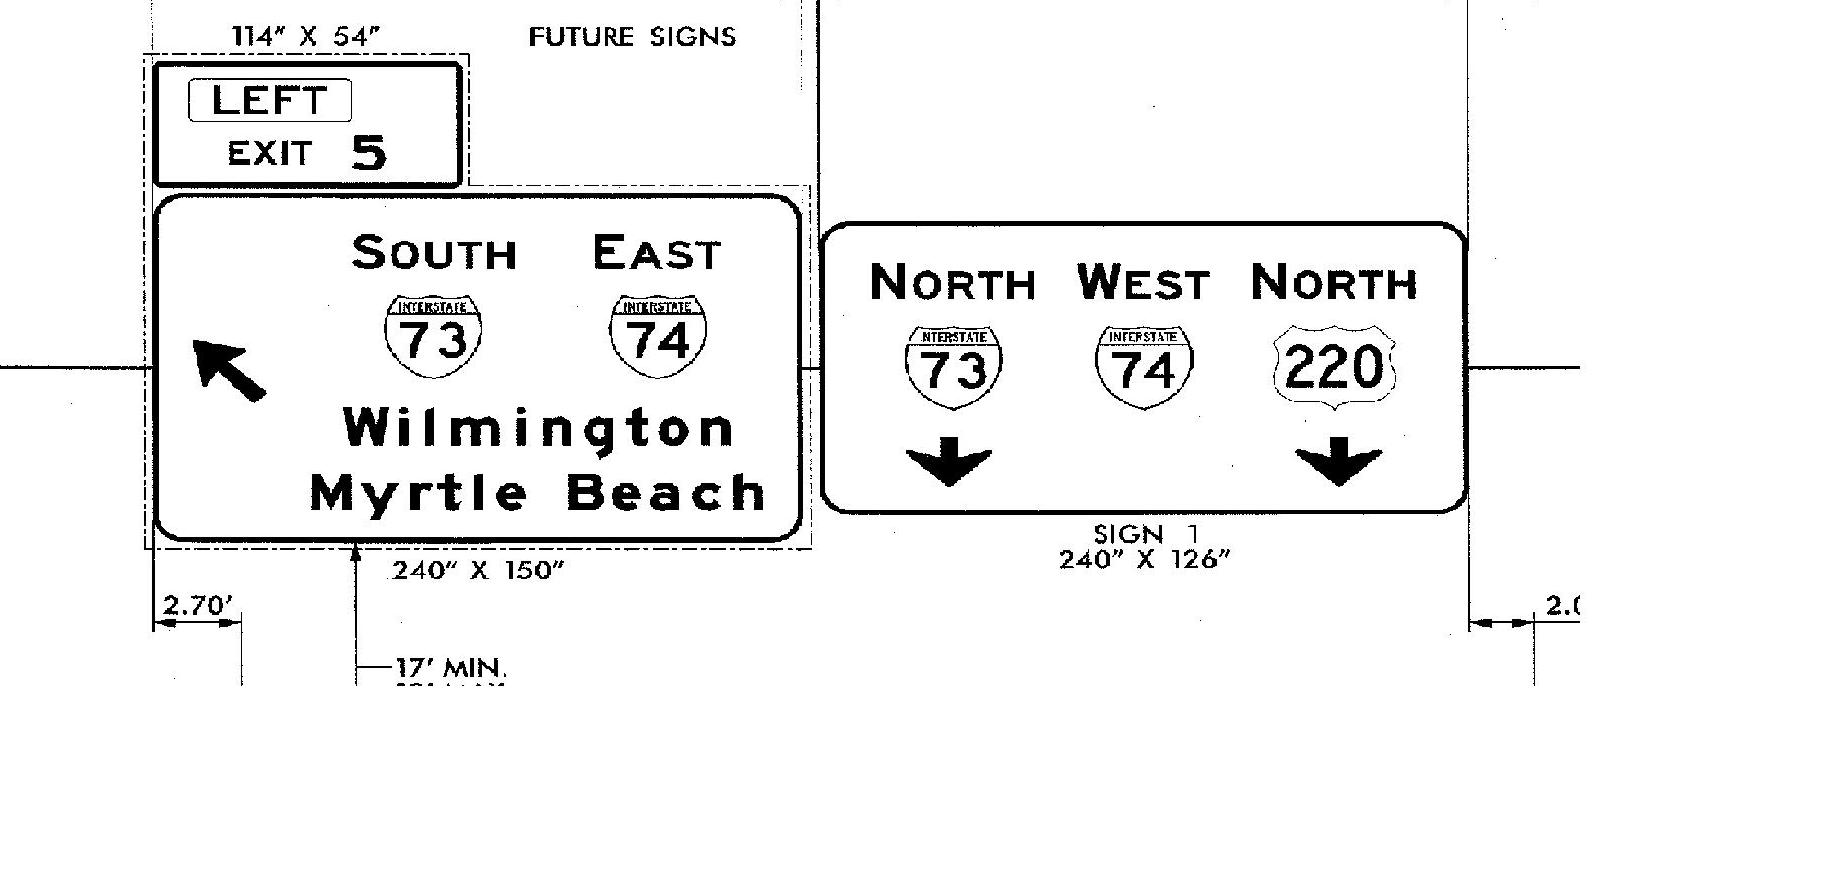 Excerpt of sign plans for US 220 interchange with future Rockingham Bypass, from NCDOT